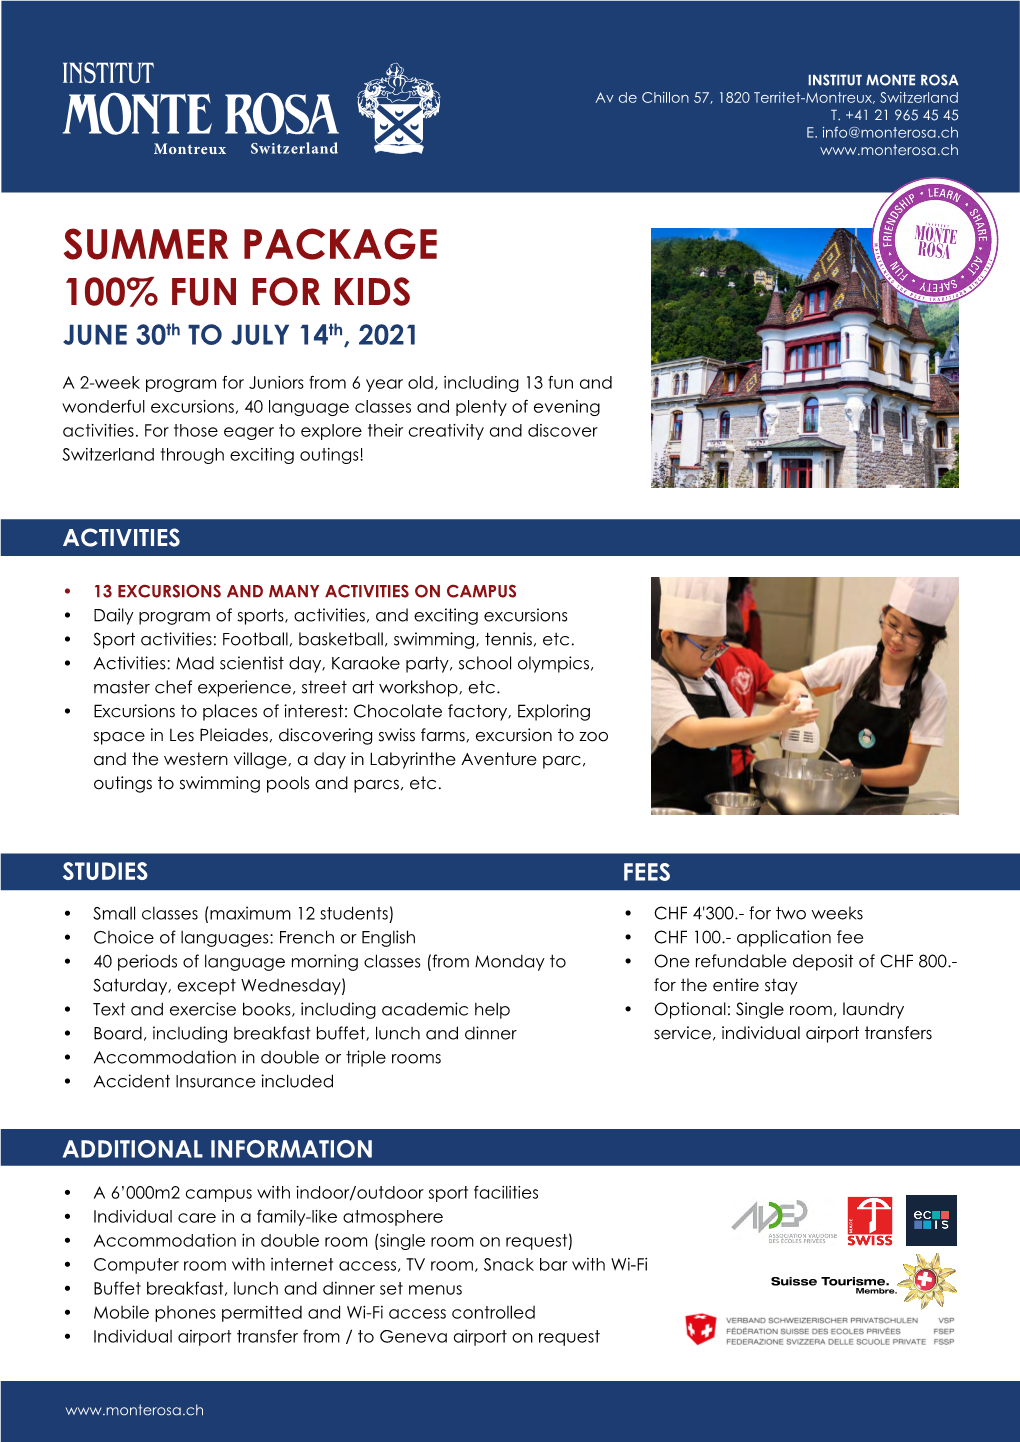 SUMMER PACKAGE 100% FUN for KIDS JUNE 30Th to JULY 14Th, 2021